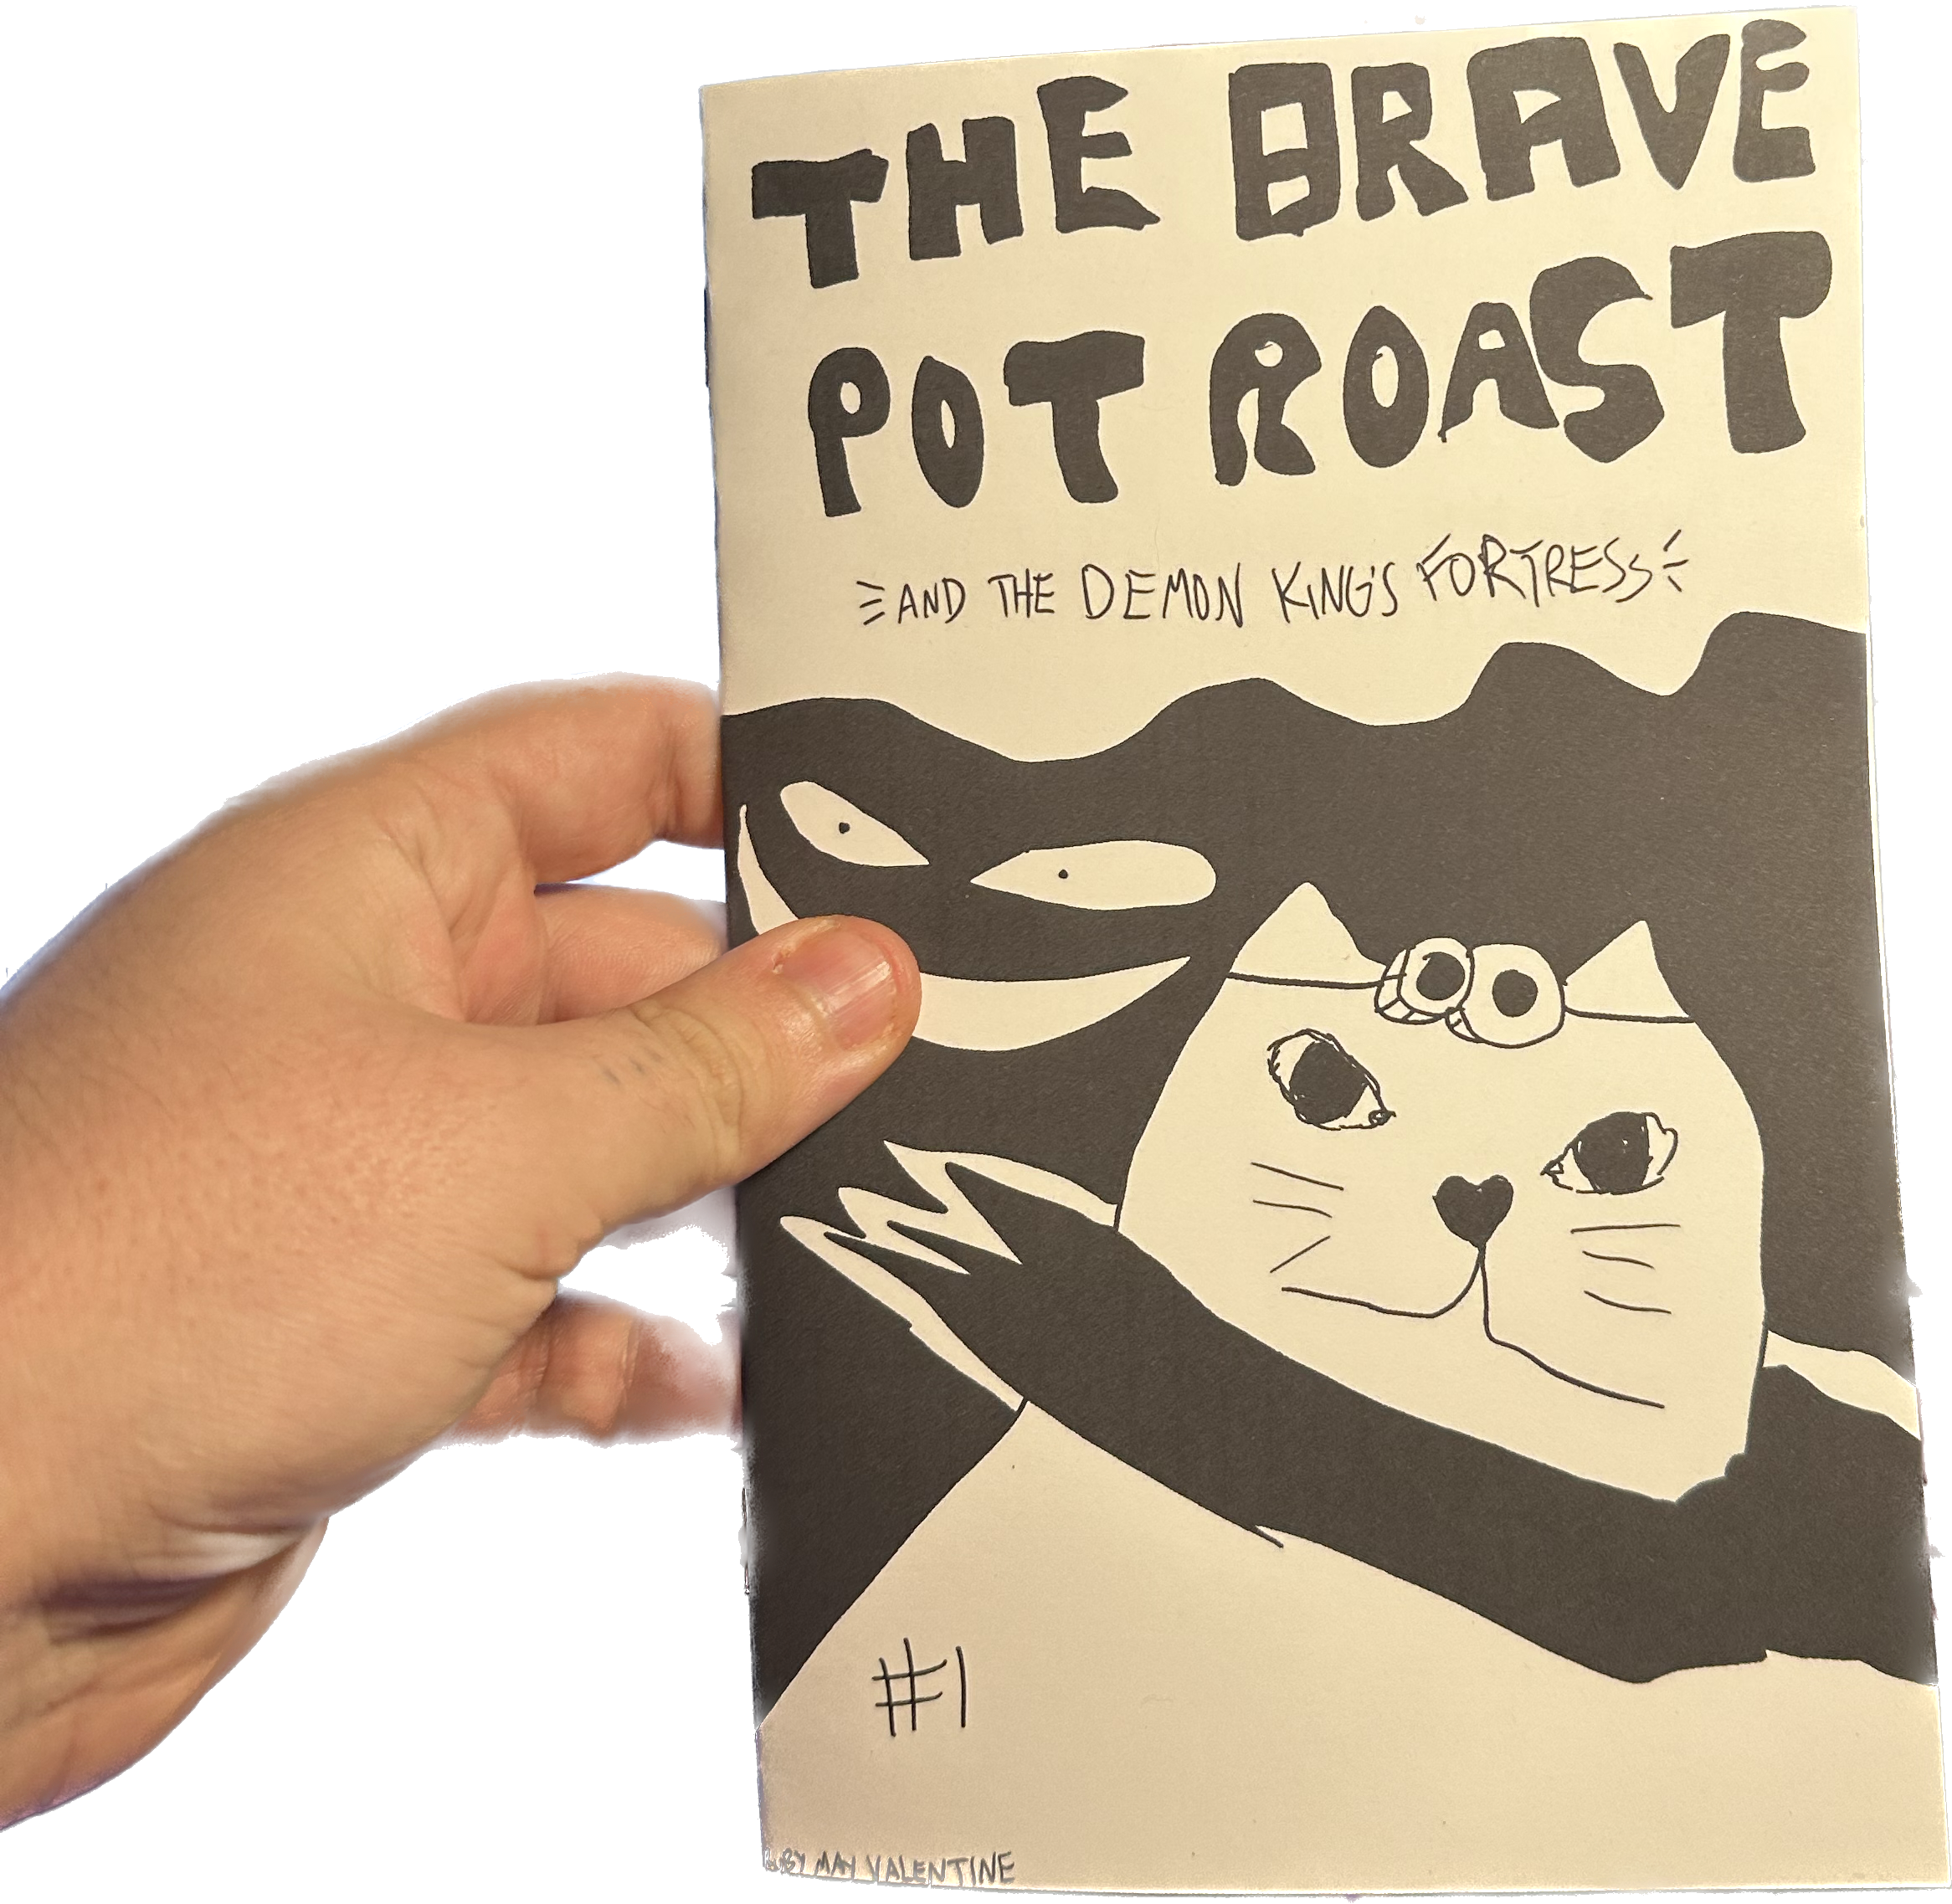 a picture of a cutout hand holding a copy of the brave pot roast #1 which shows a cat and a scary face on the cover